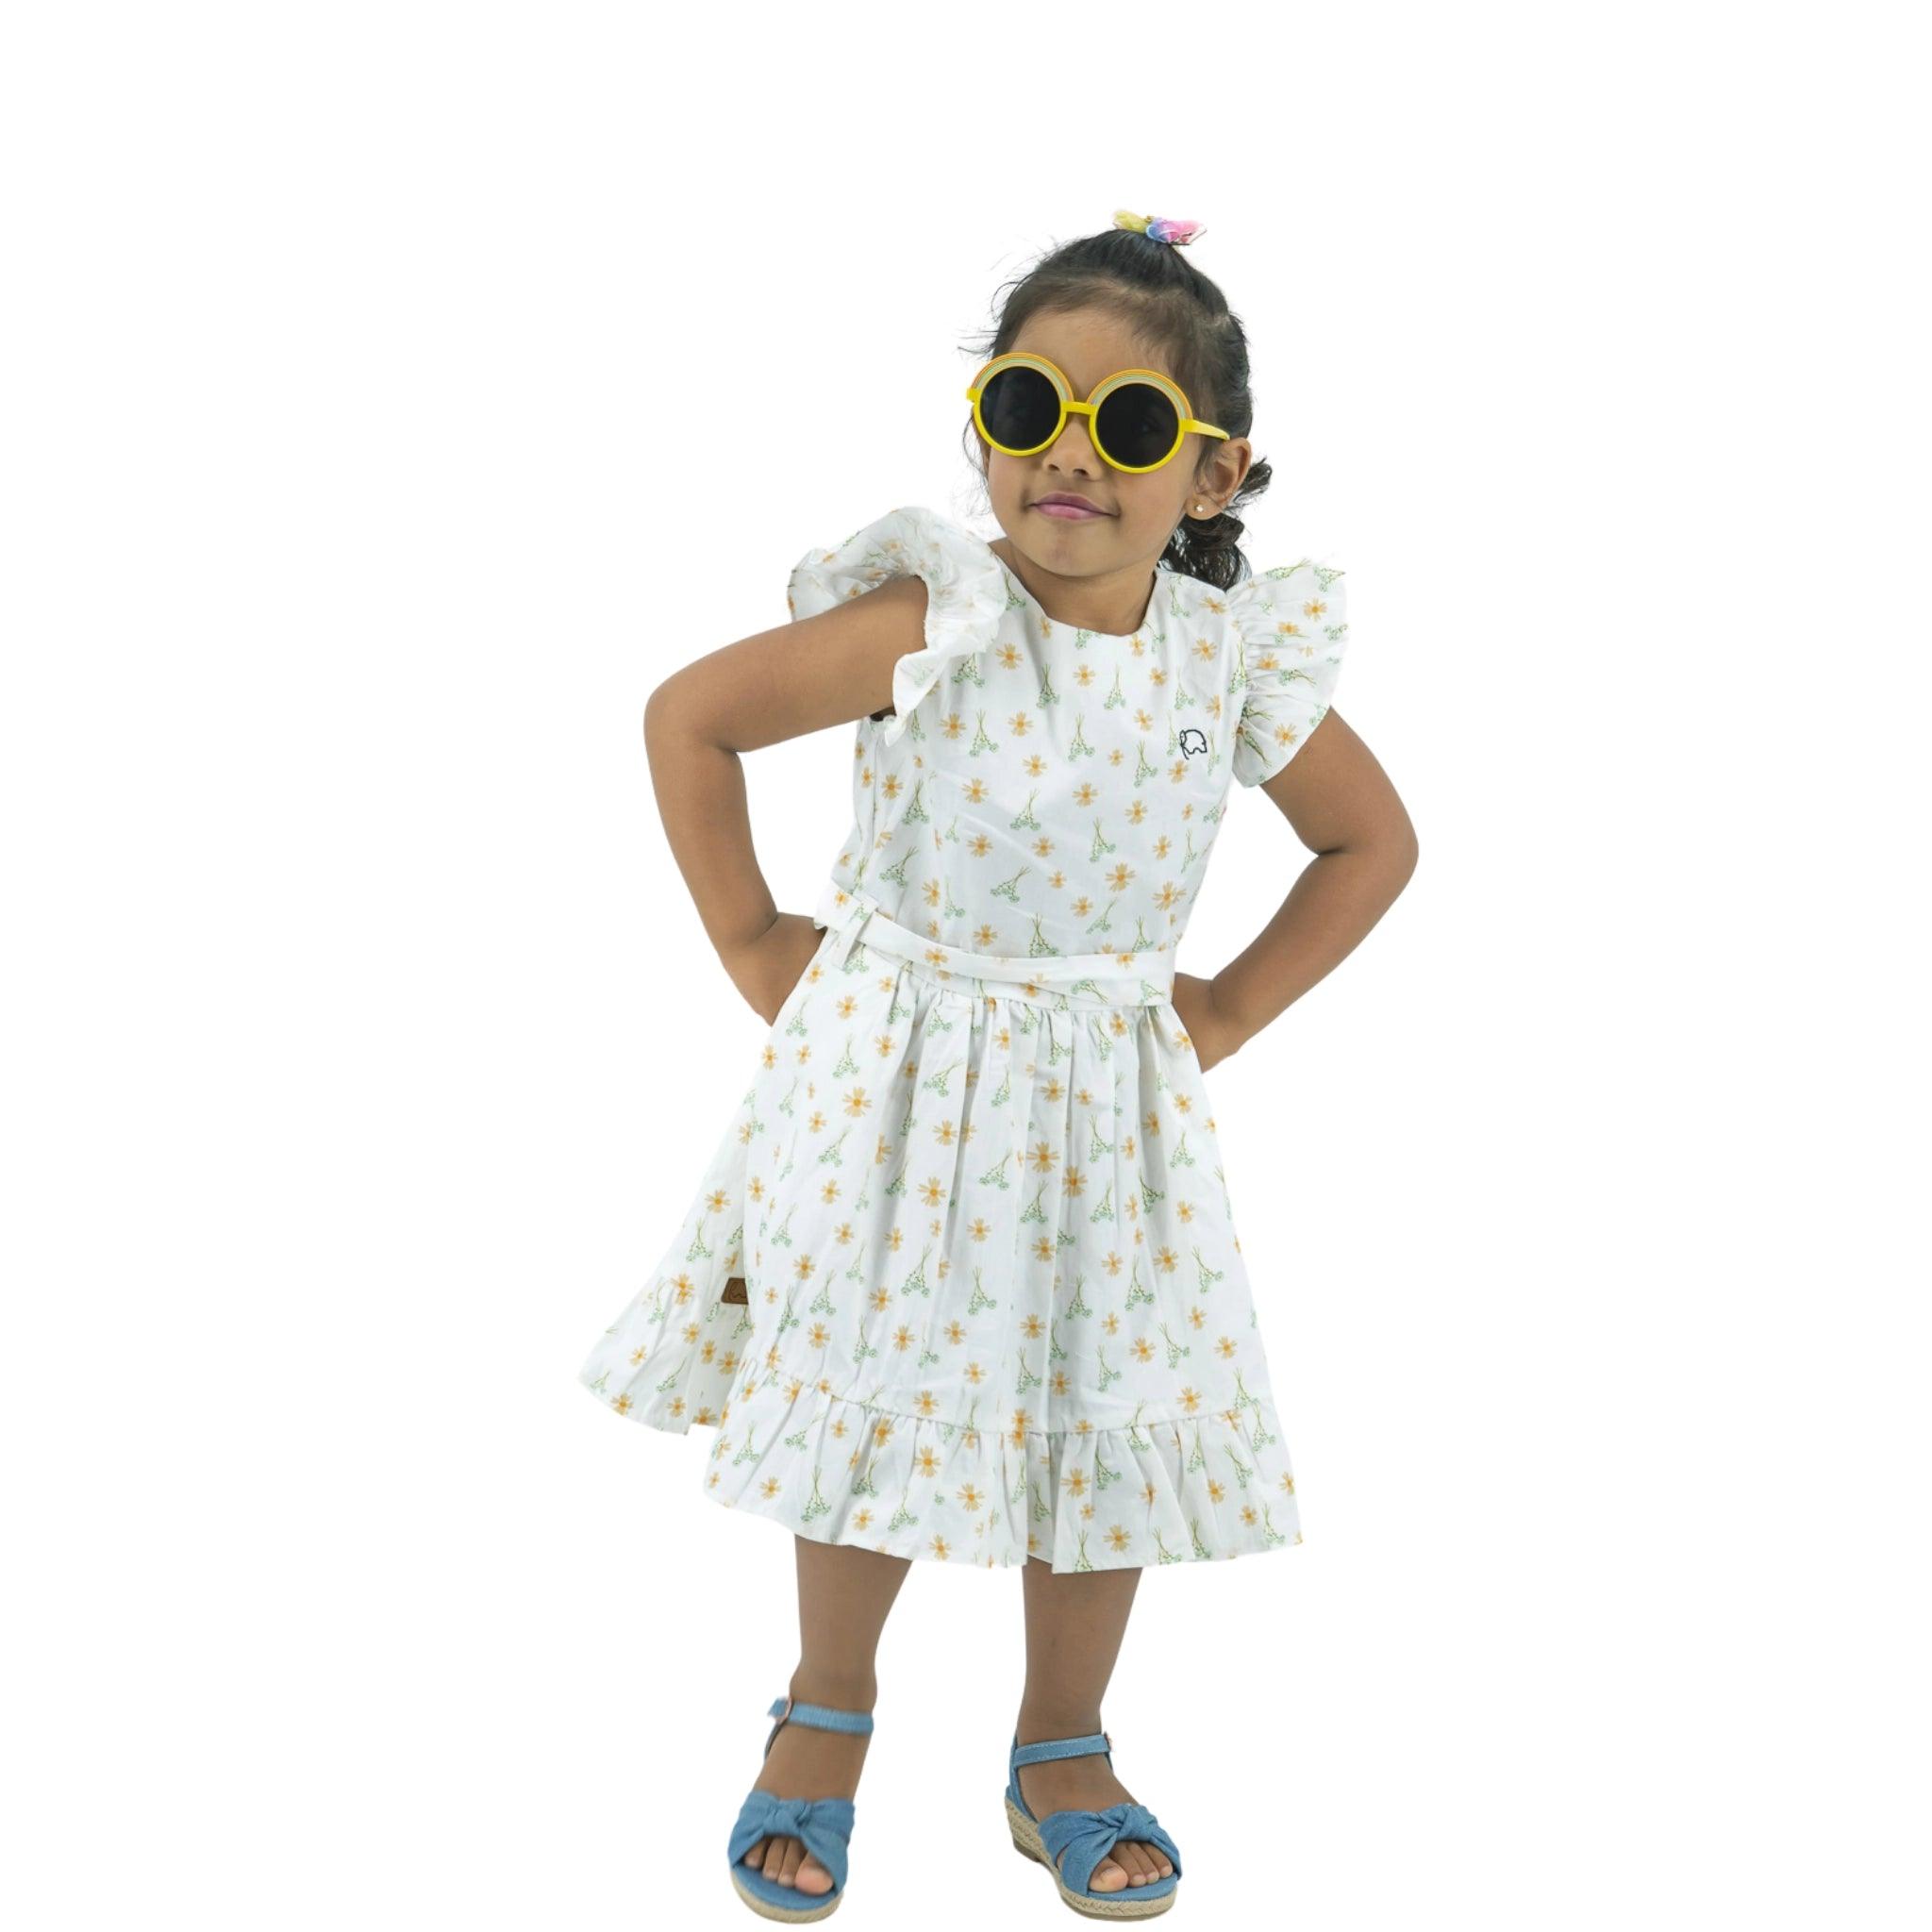 A young girl stands with hands on her hips, wearing a Karee Petite Blossom Cotton Dress in Smoked Pearl, yellow sunglasses, and blue sandals, against a white background.